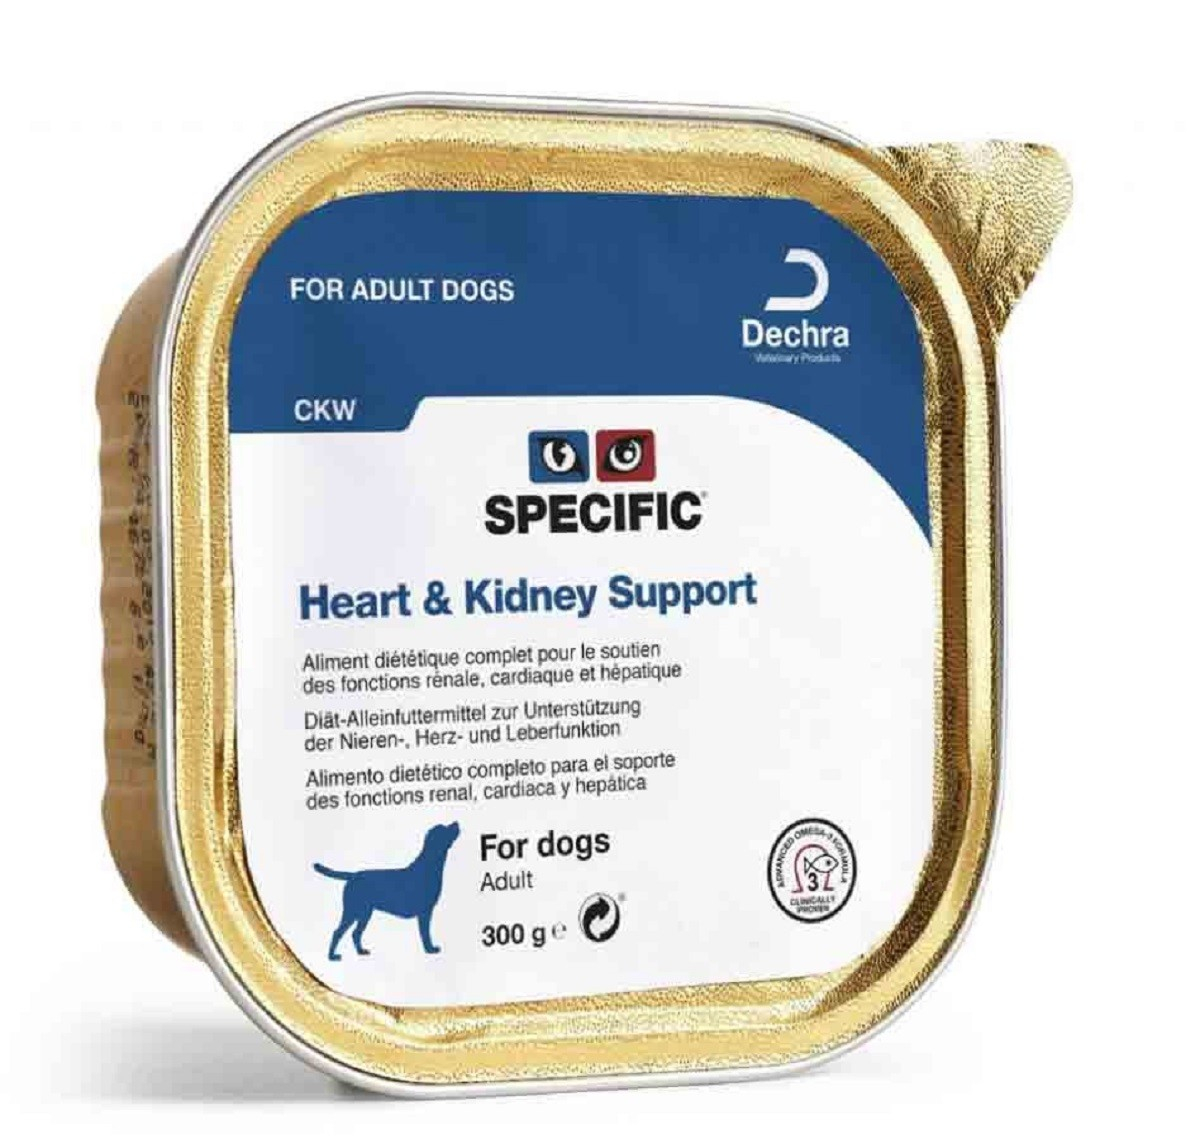 SPECIFIC CKW Pack de 6 Patês Heart & Kidney Support 300g para Cão Adulto